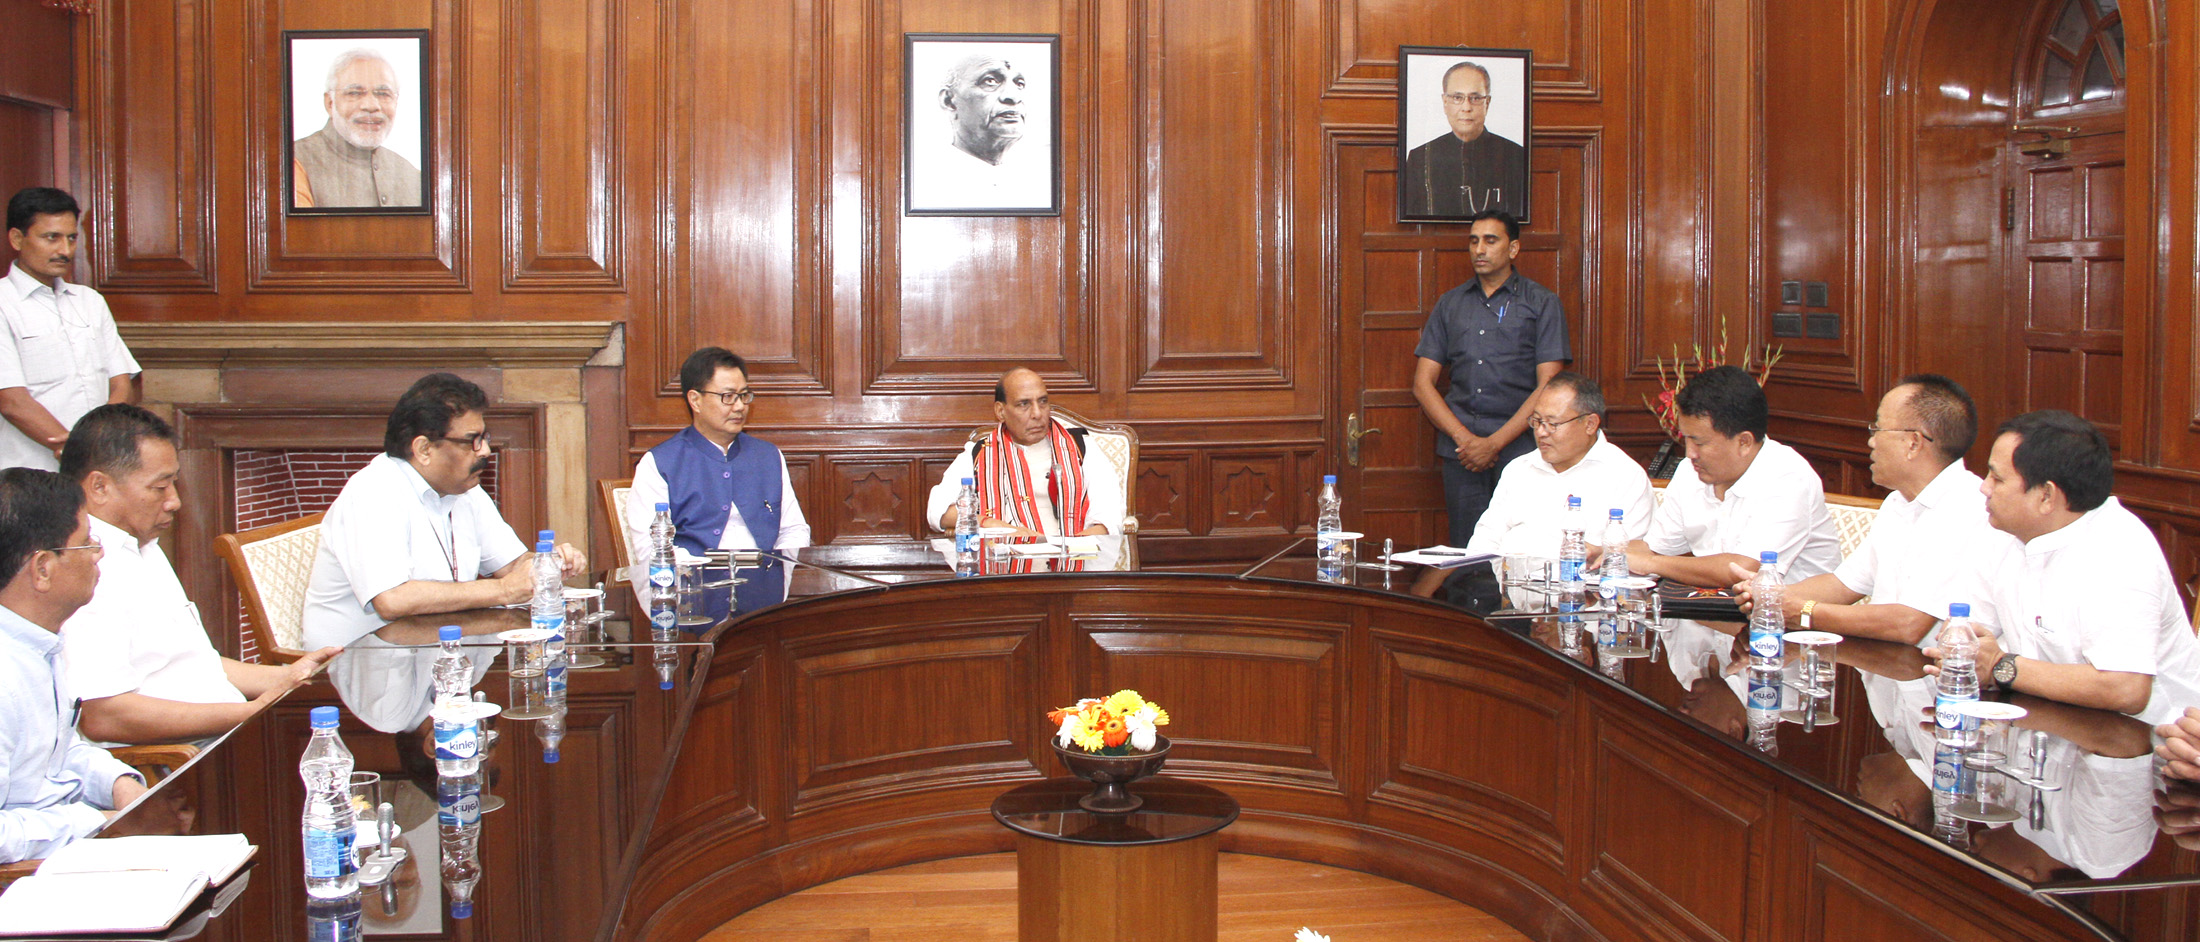 The Union Home Minister, Shri Rajnath Singh meeting the Nagaland delegation, in New Delhi on October 27, 2015.  The Minister of State for Home Affairs, Shri Kiren Rijiju and the Secretary (Internal Security), Shri Ashok Prasad are also seen.